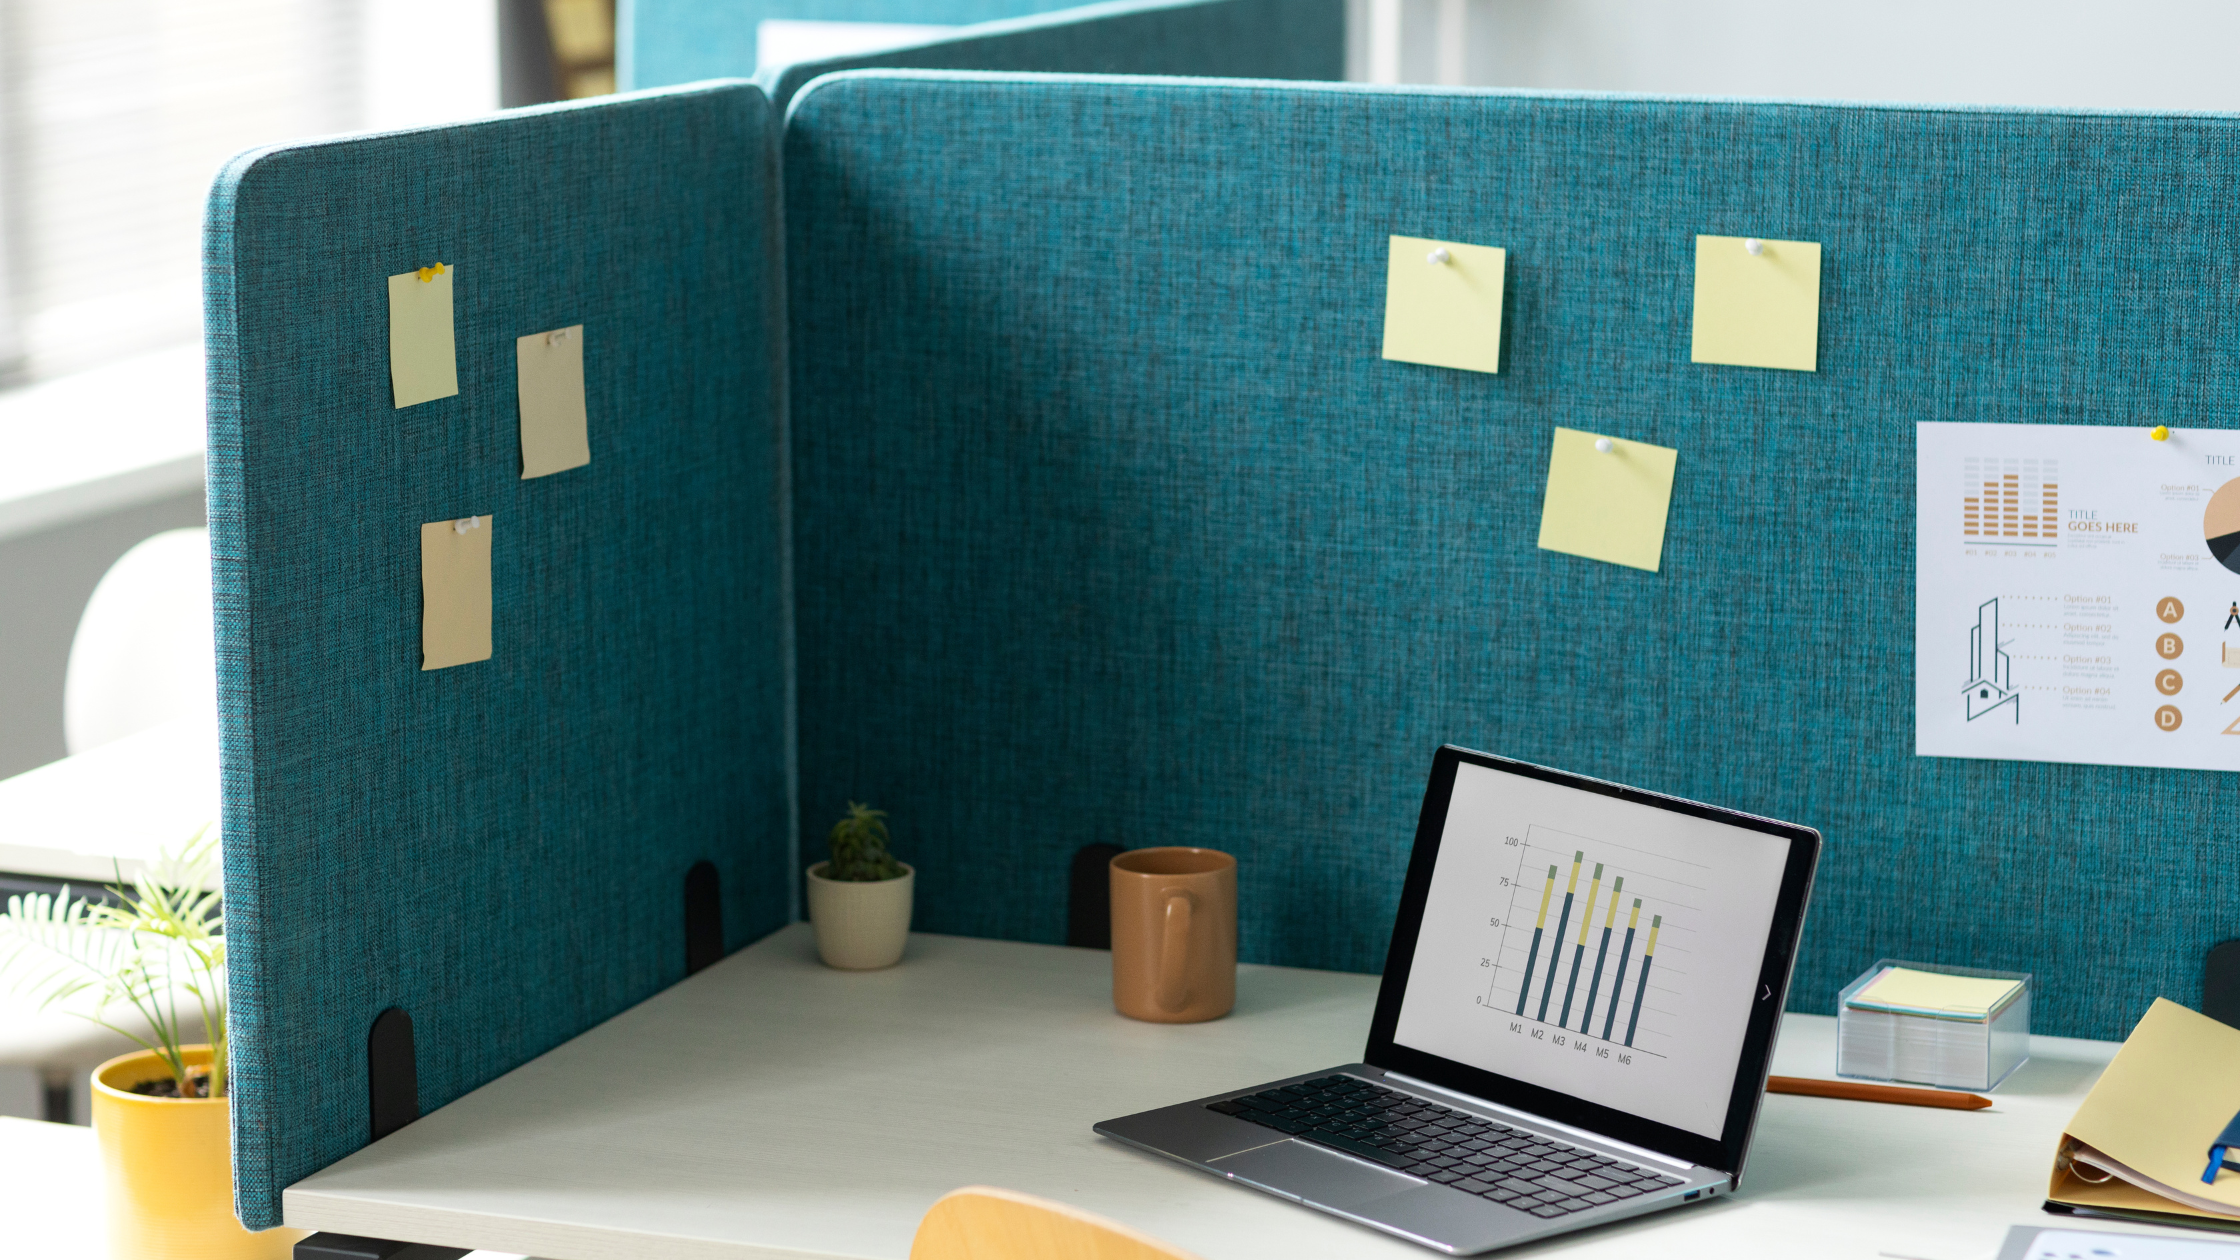 What Are the Benefits of Acoustic Treatment for a More Productive Workplace